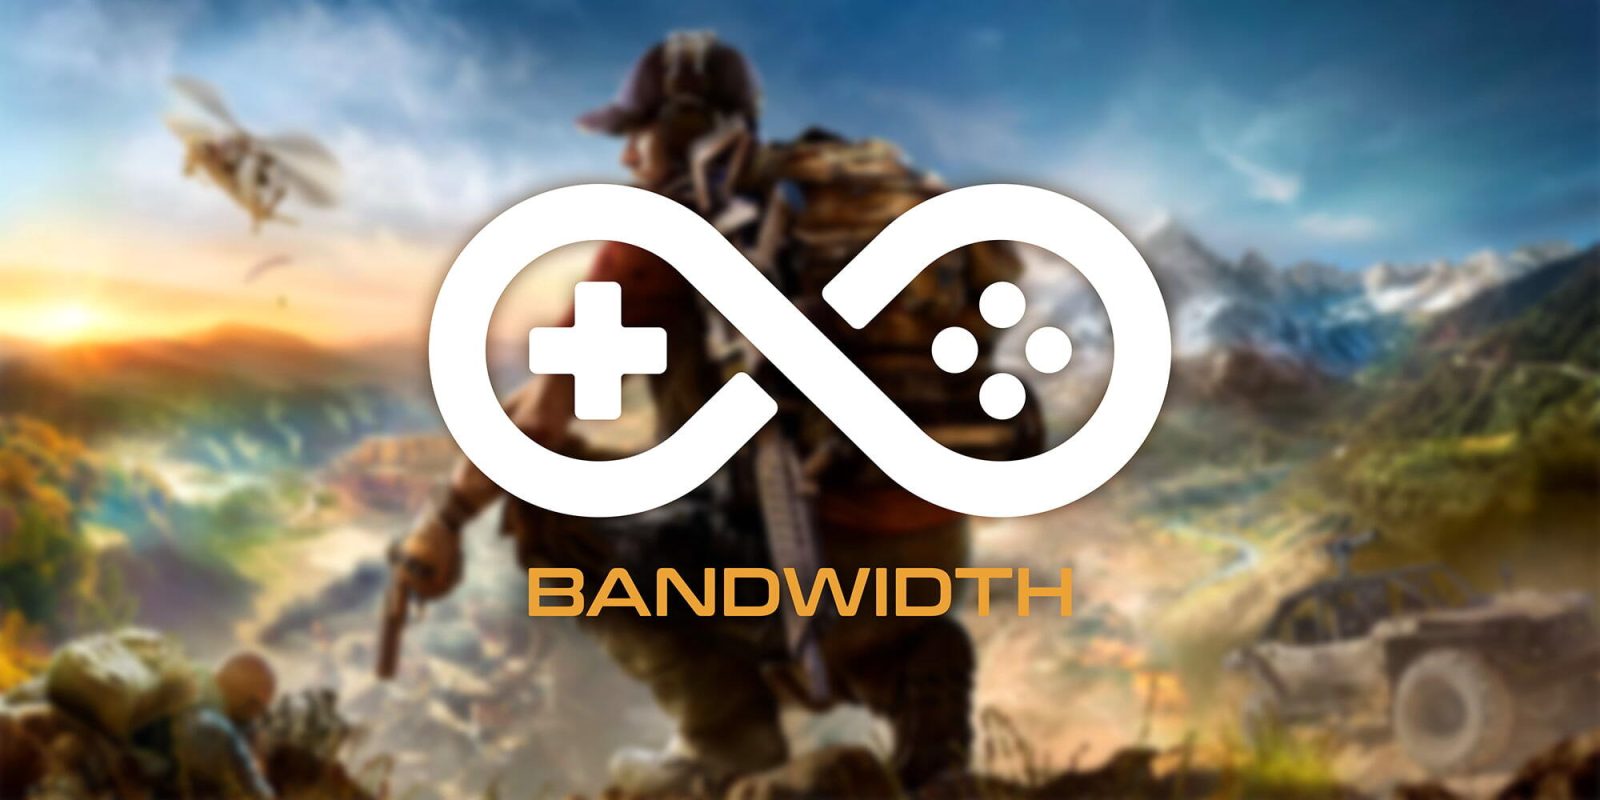 Bandwidth: Microsoft testing new Xbox Game Pass family plan, adds Ghost Recon Wildlands